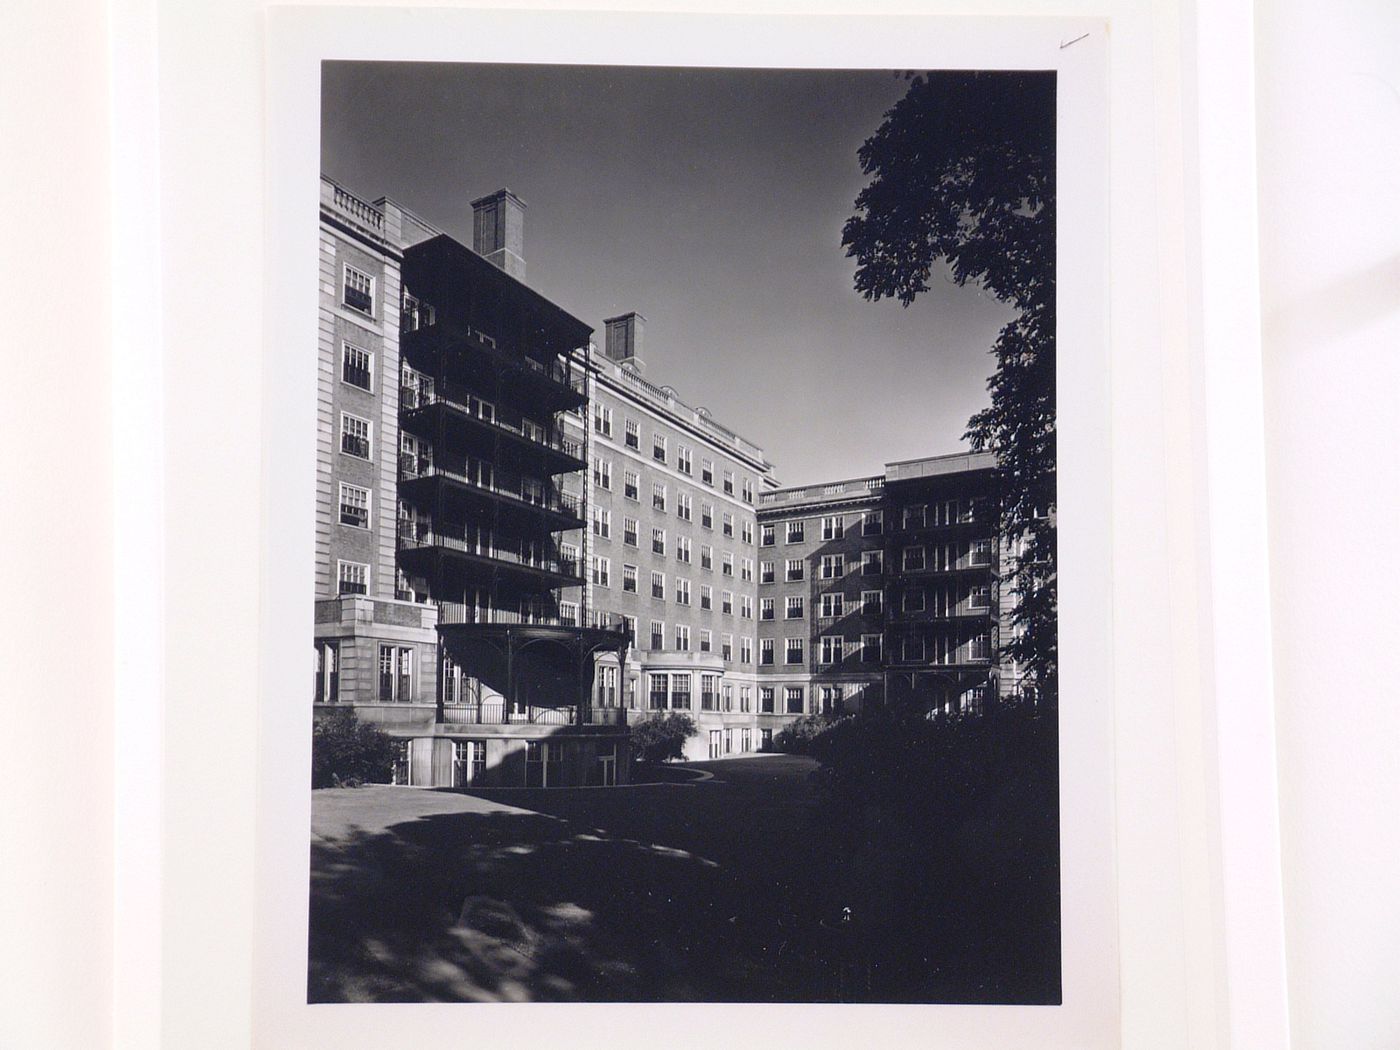 View of the rear façade of Clara Ford Nurses' Home, Henry Ford Hospital, Detroit, Michigan